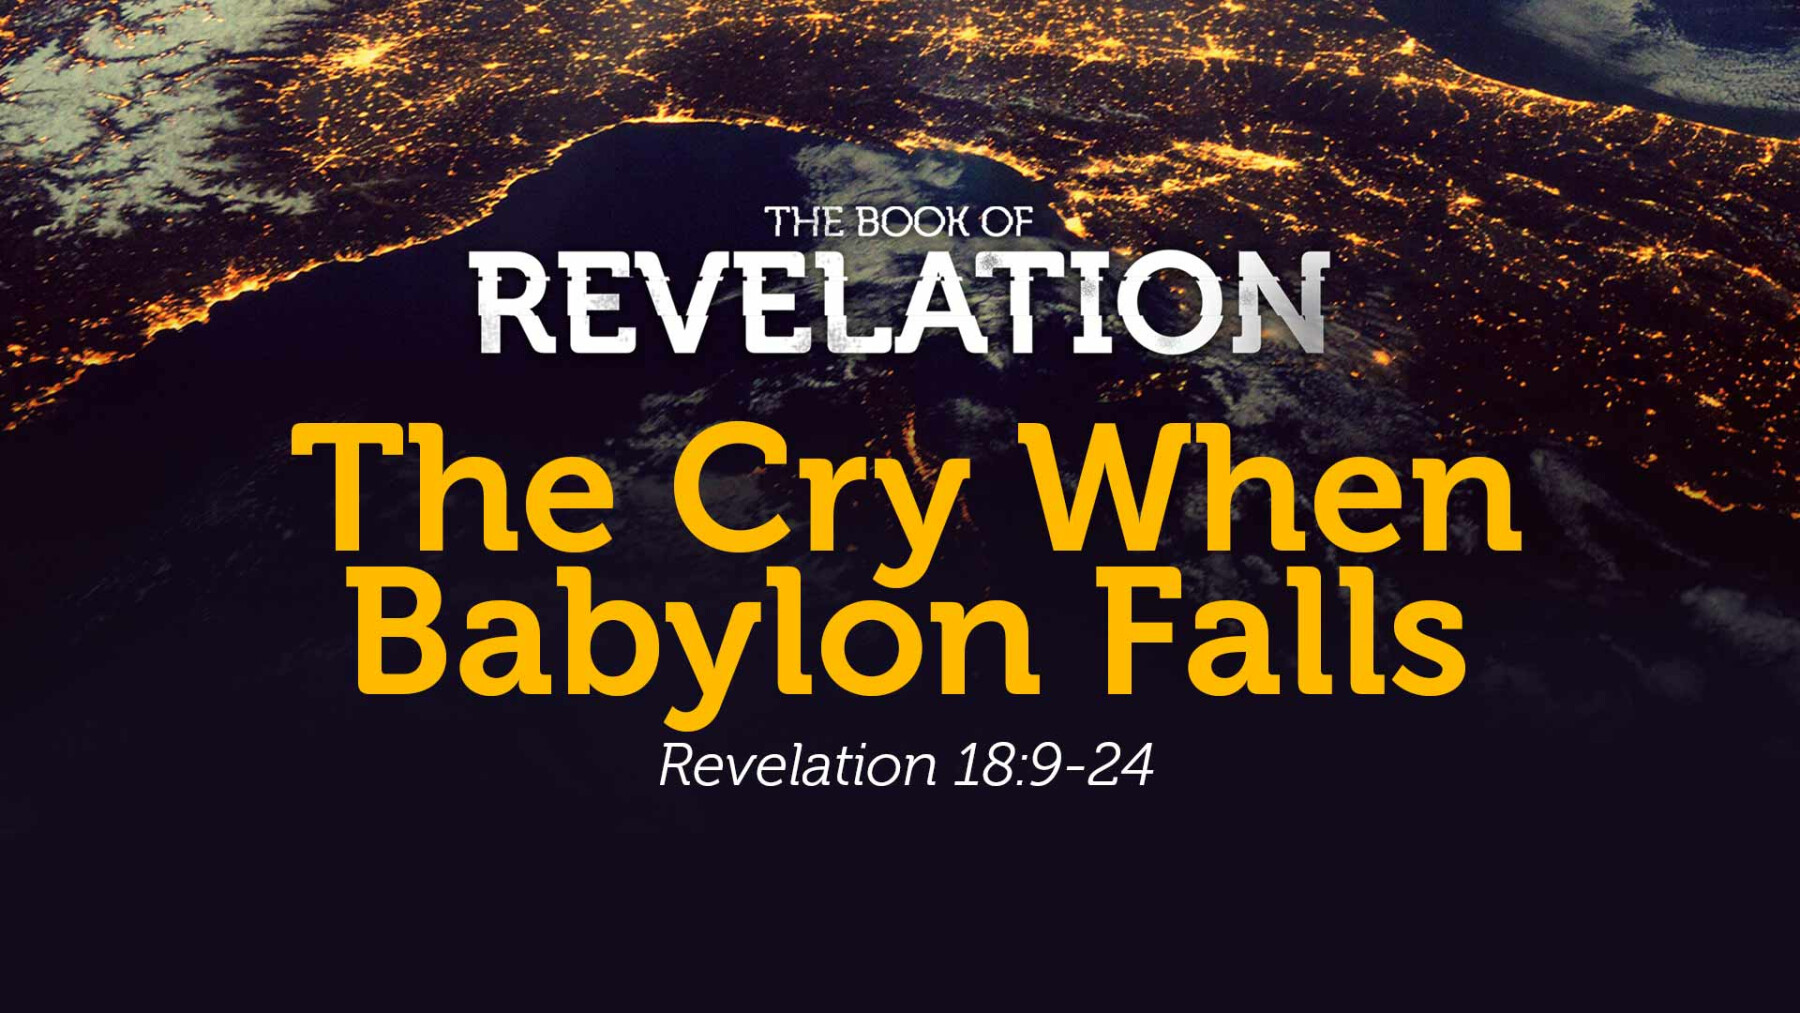 BEWARE: Babylon Falls - The Great Collapse Comes